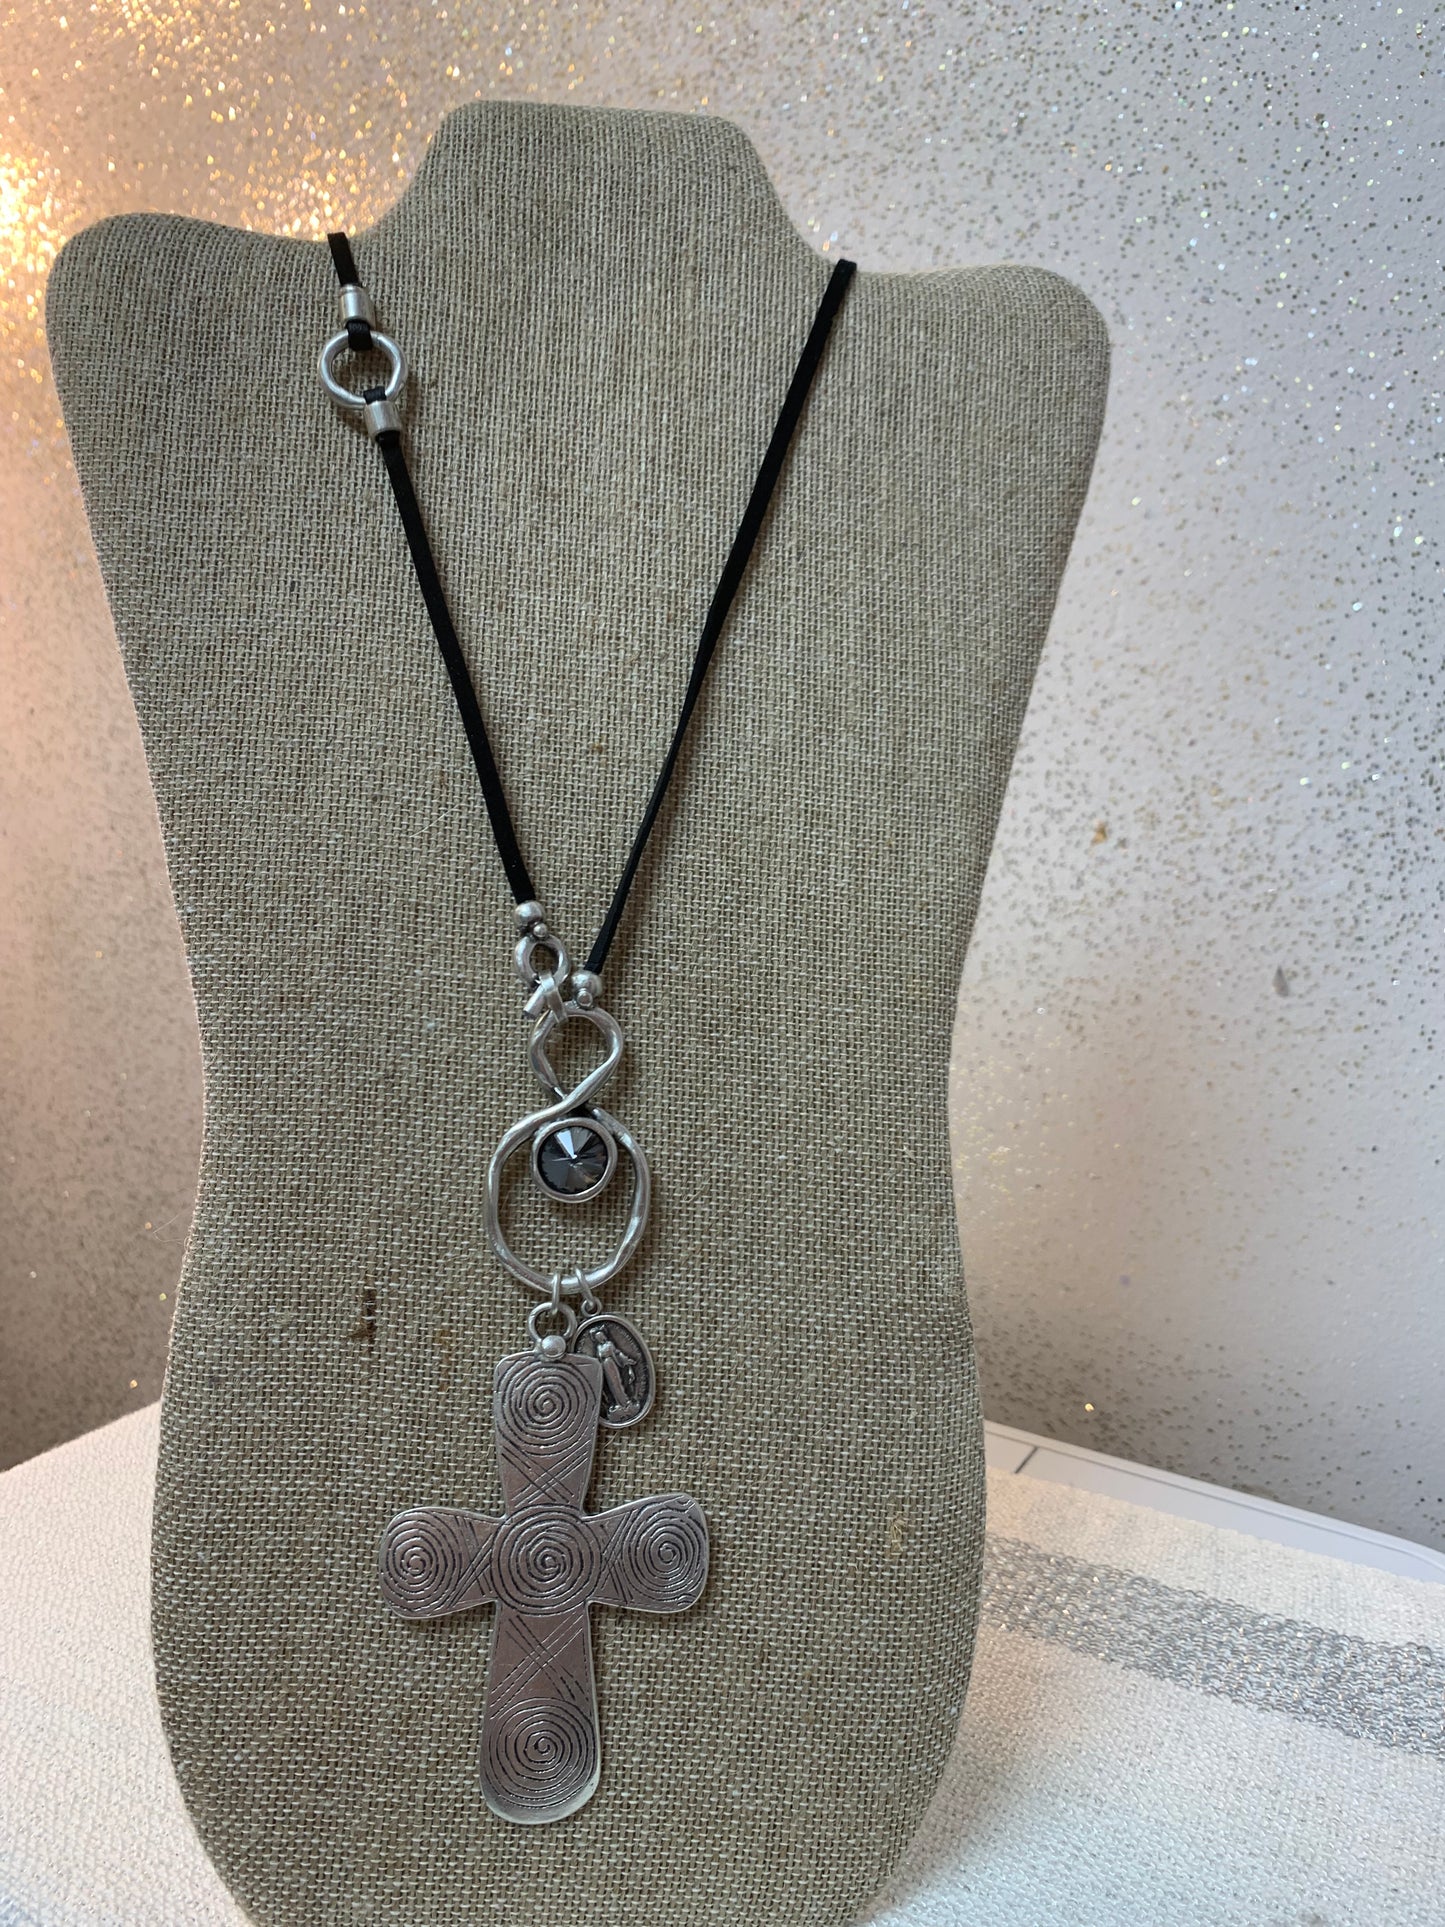 PEWTER CROSS PENDANT W/CHARM AND CRYSTAL